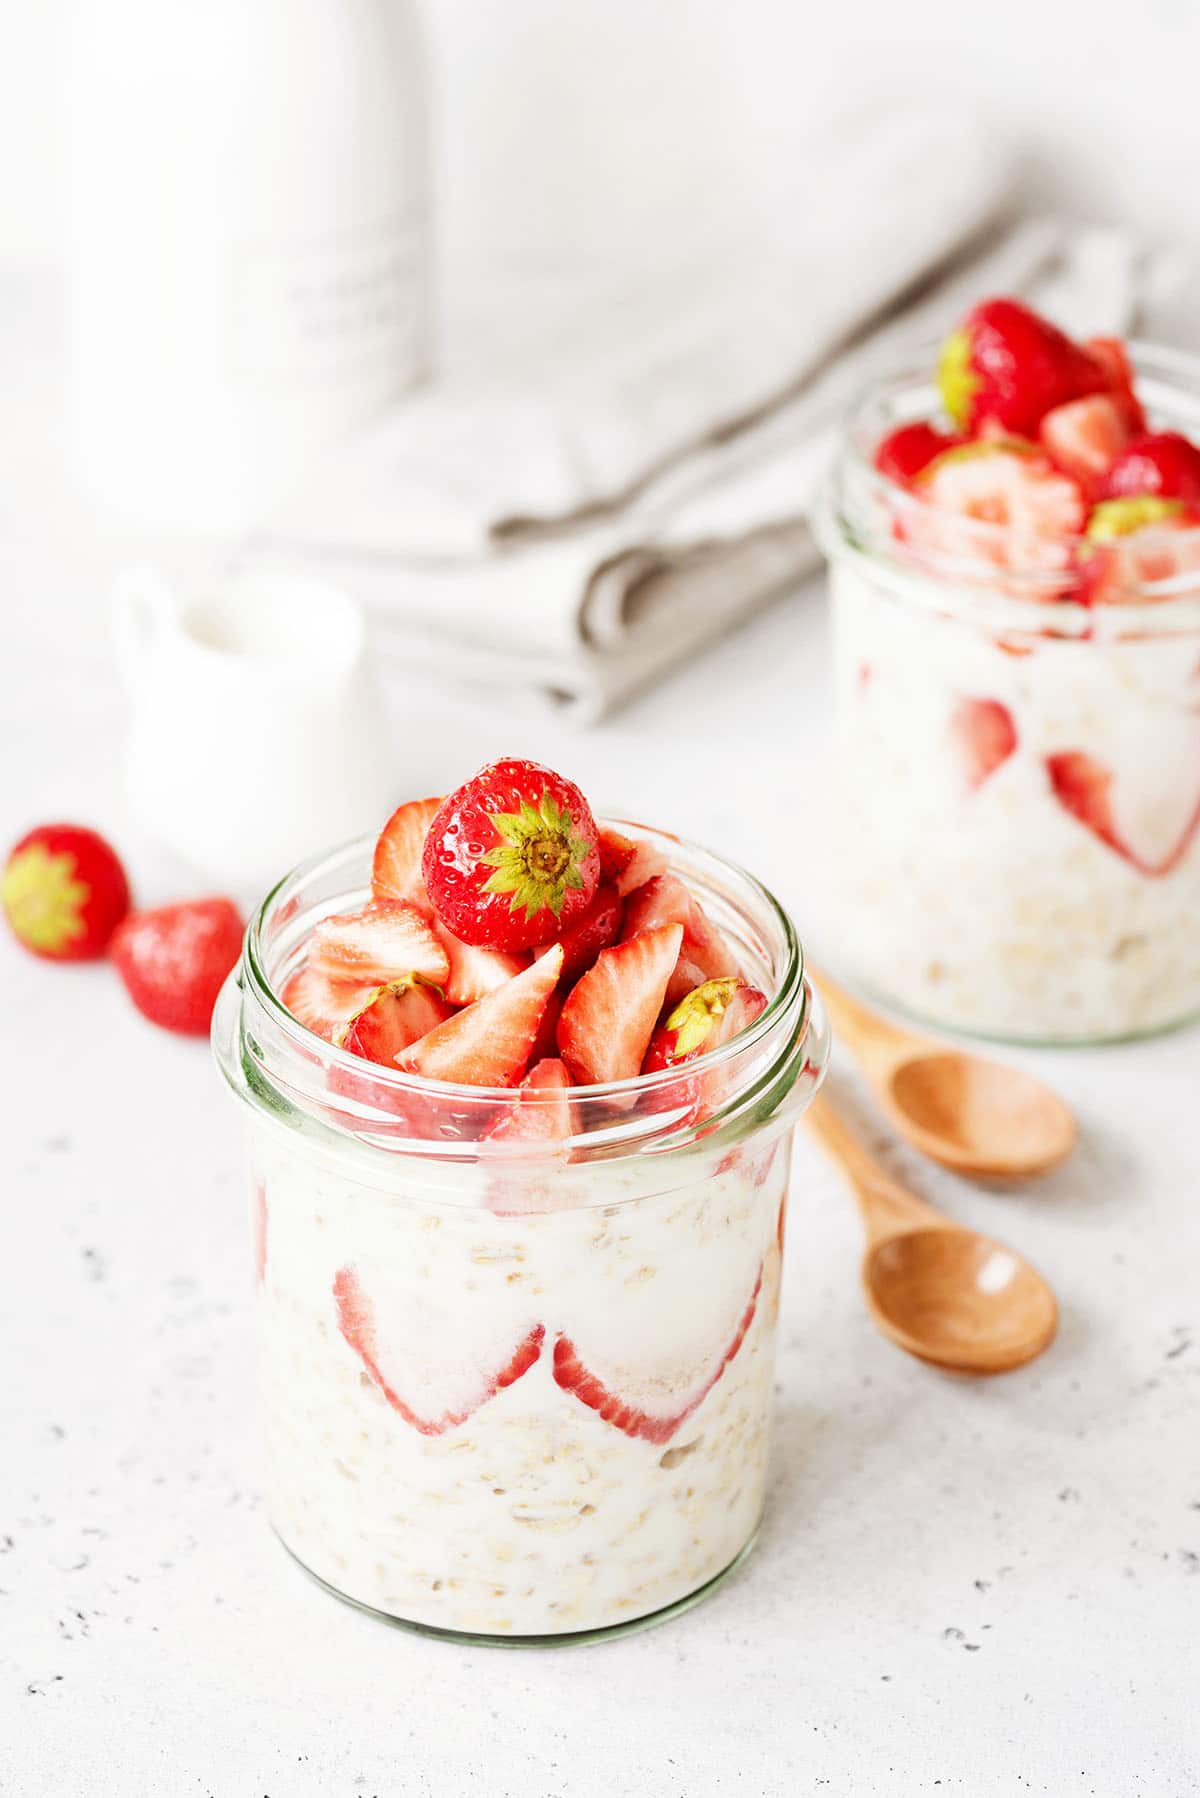 healthy strawberry overnight oats in a glass jar with wooden spoons and another glass jar in the background